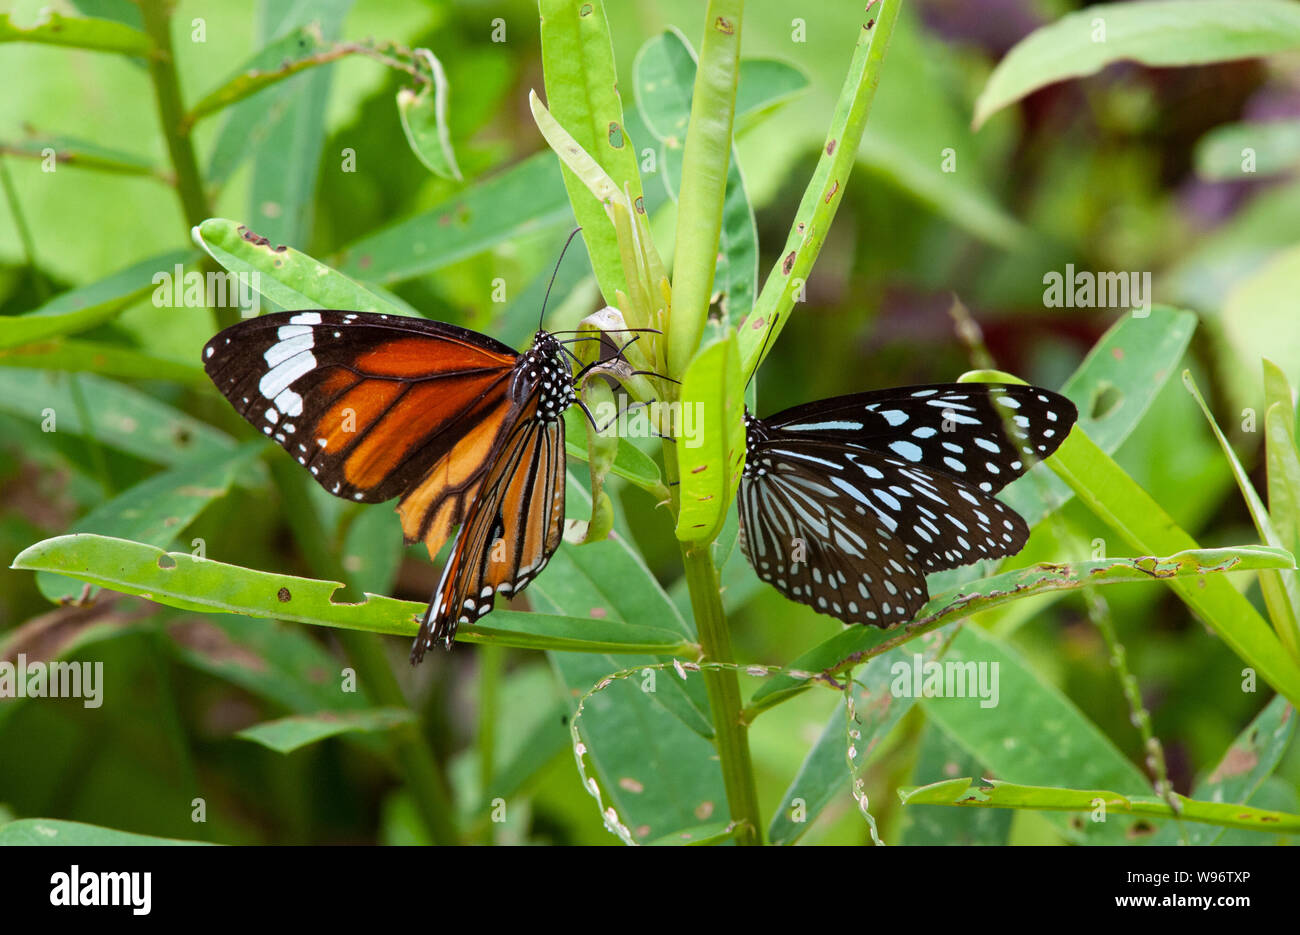 Blue Tiger butterfly, Tirumala limniace, and Common or Striped Tiger butterfly, Danaus genutia, Western Ghats, India Stock Photo